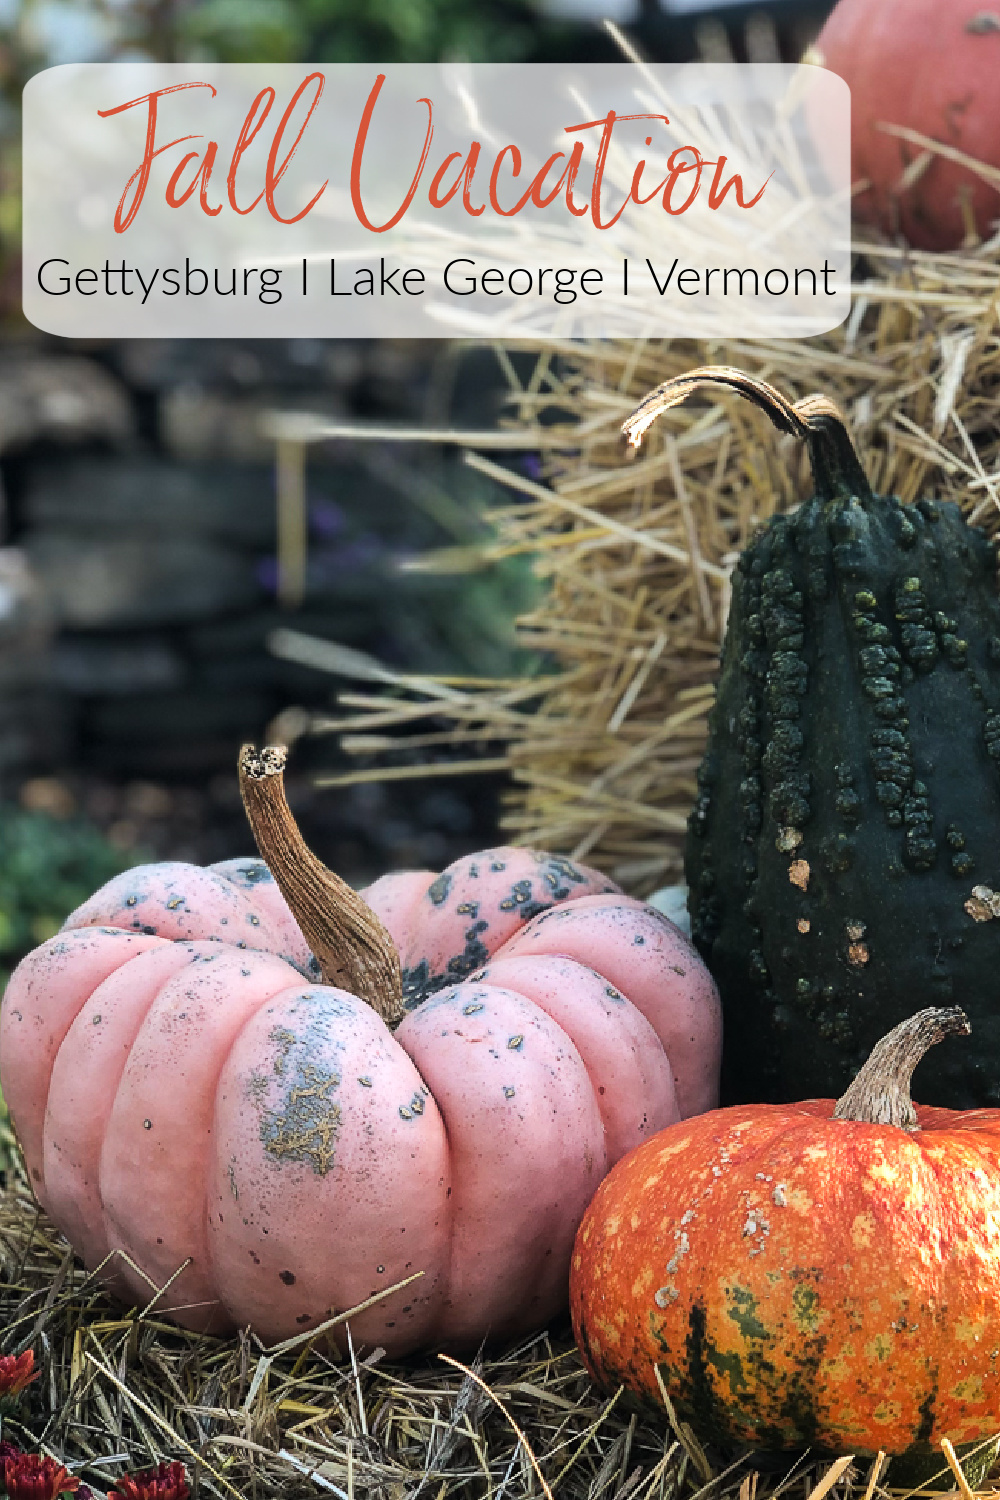 Fall Vacation in Gettysburg, Lake George, and Vermont